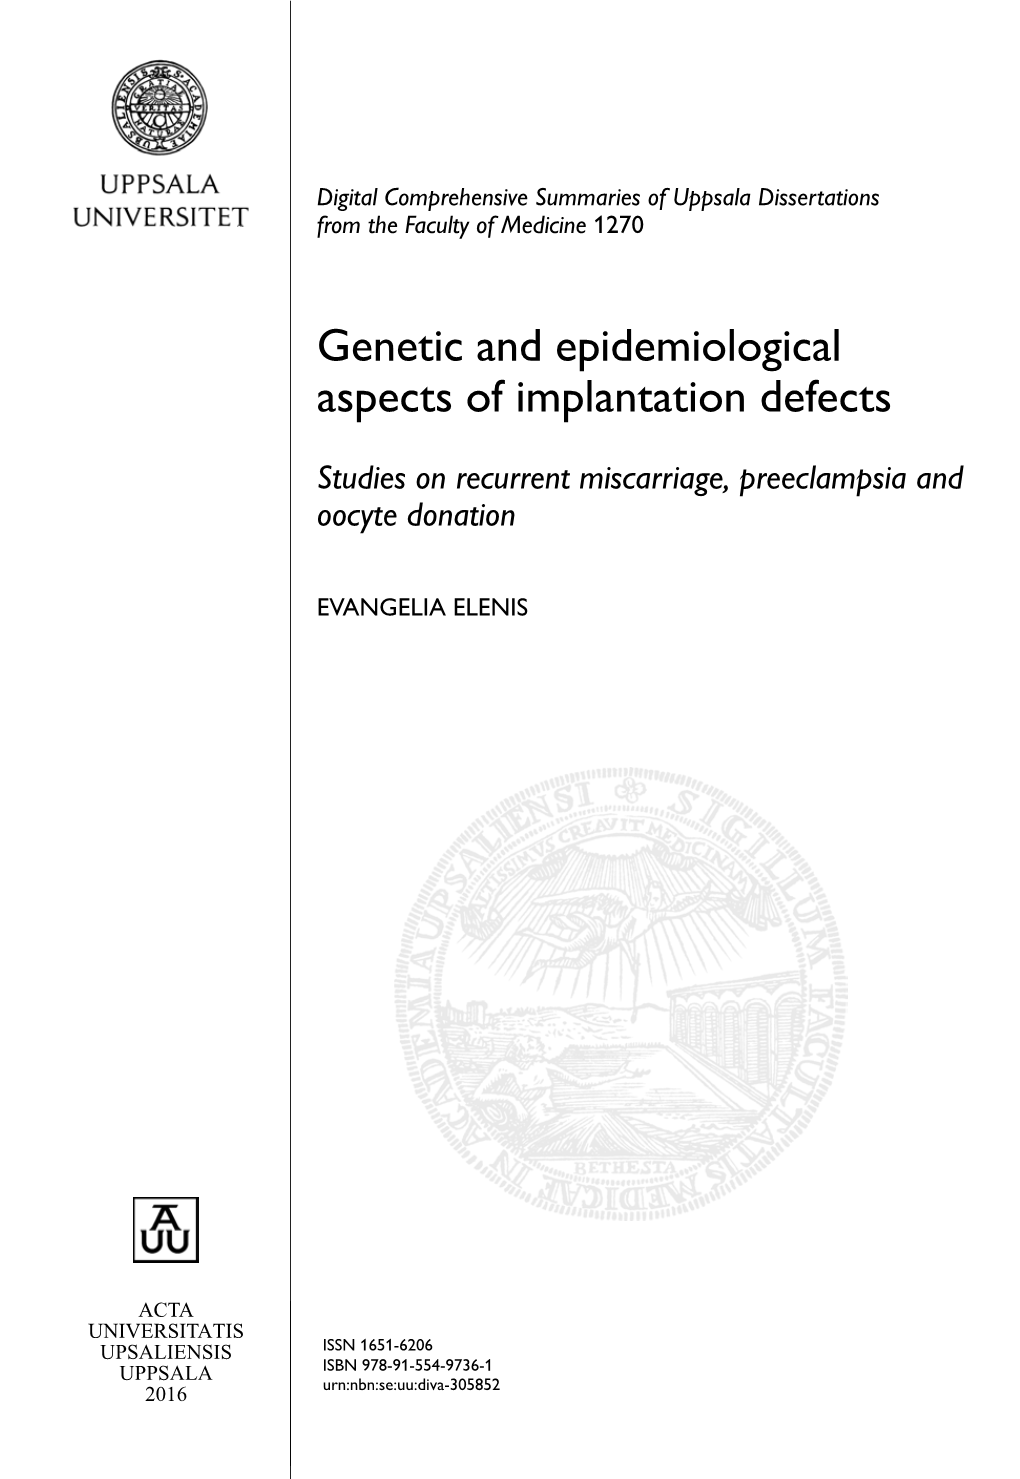 Genetic and Epidemiological Aspects of Implantation Defects